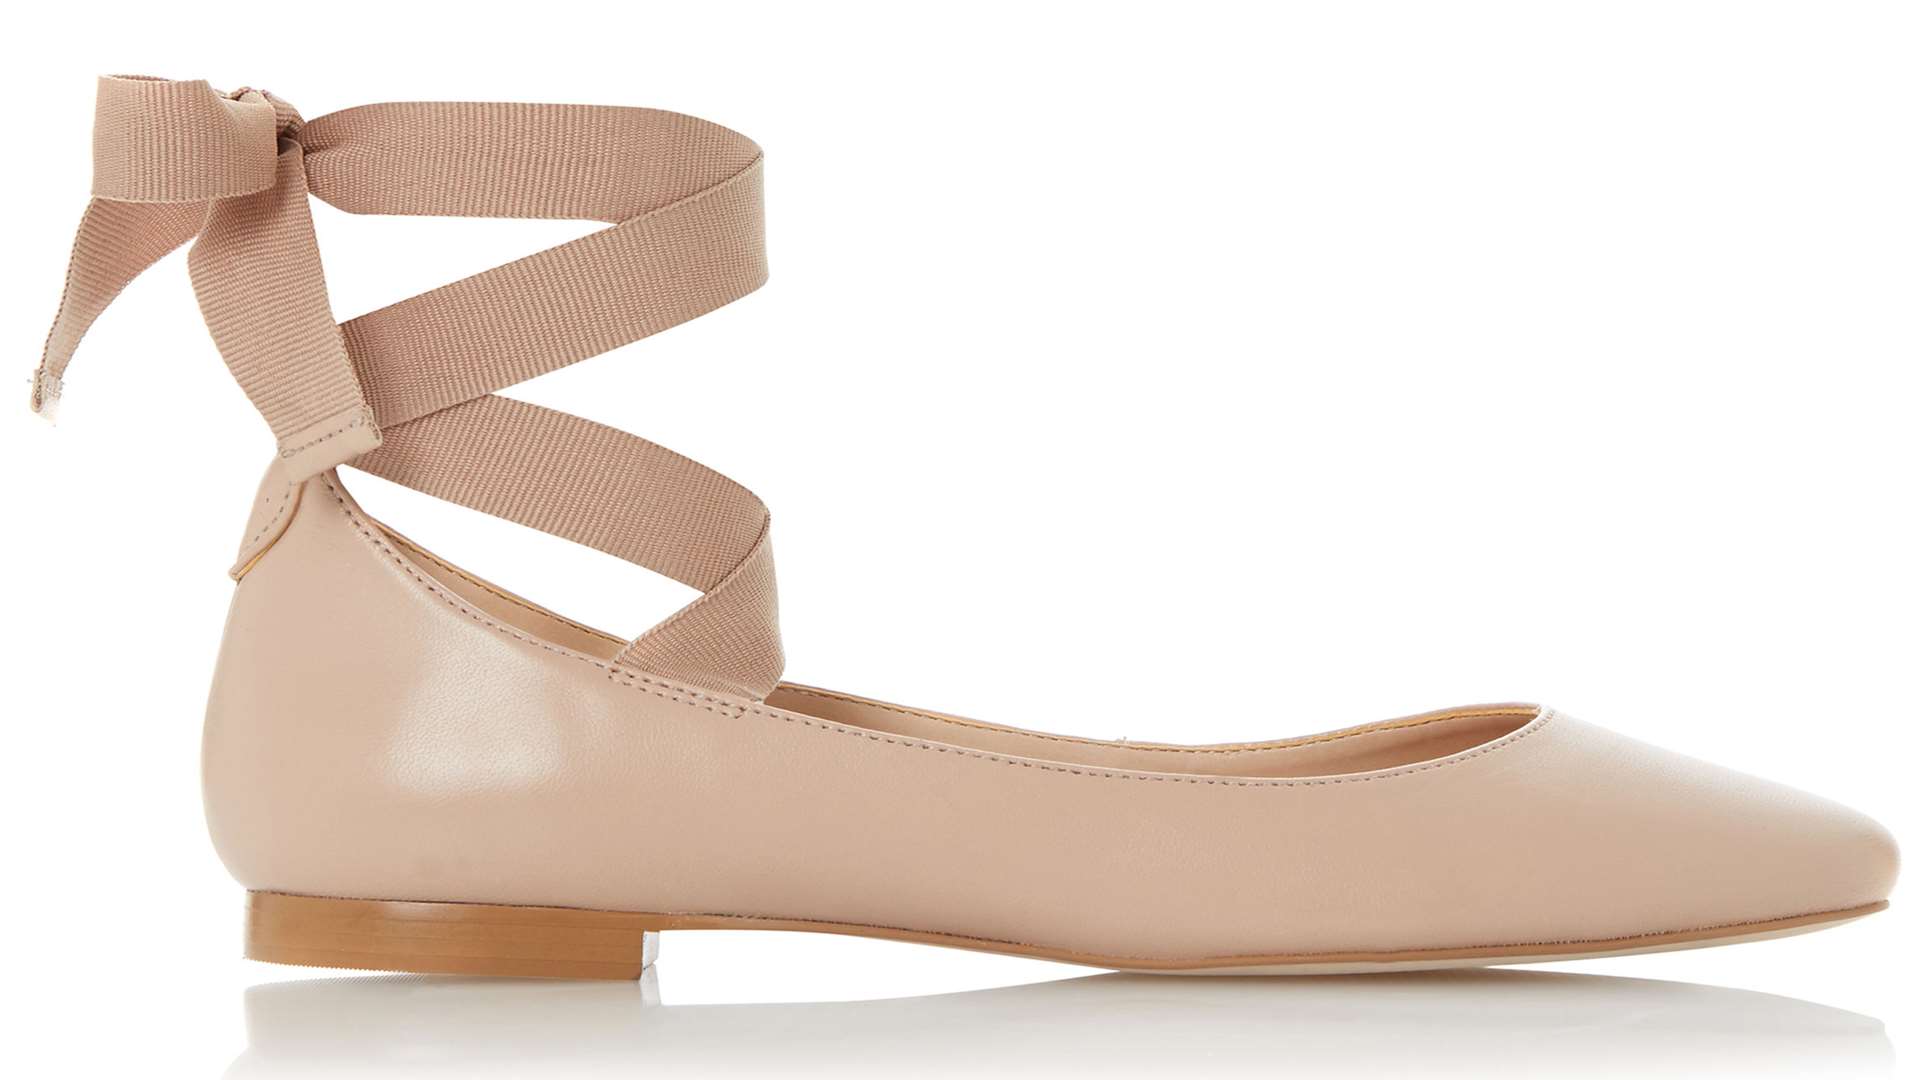 We love these Handsel nude ballerina shoes for £65 at Dune. Show off your dancing slippers with cropped trousers, culottes or a calf-skimming midi skirt.